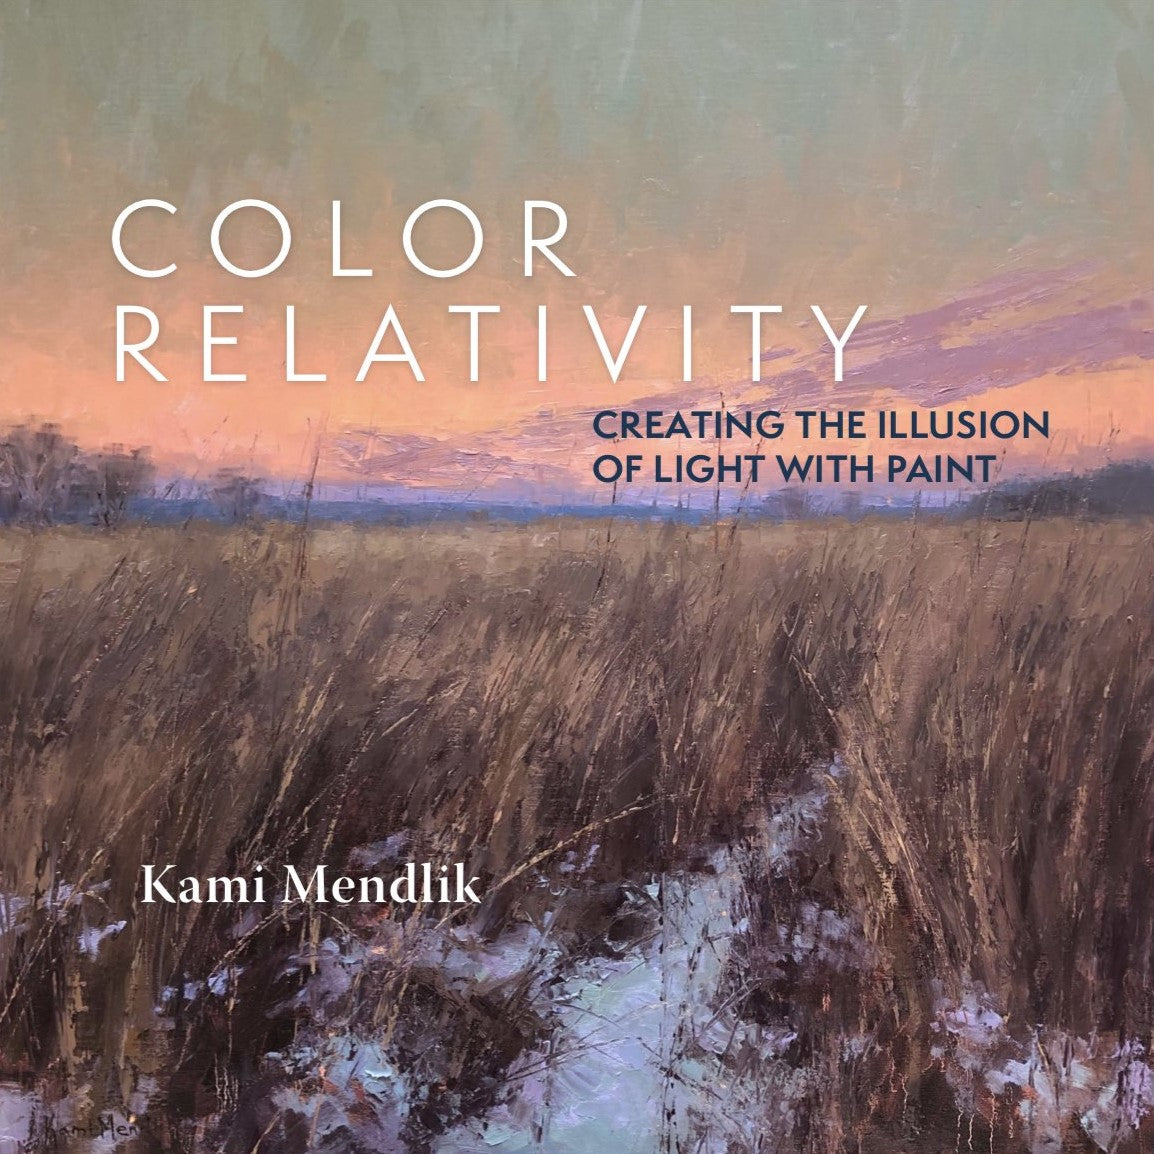 Kami Mendlik: COLOR RELATIVITY - Creating the Illusion of Light with Paint Hardcover Book